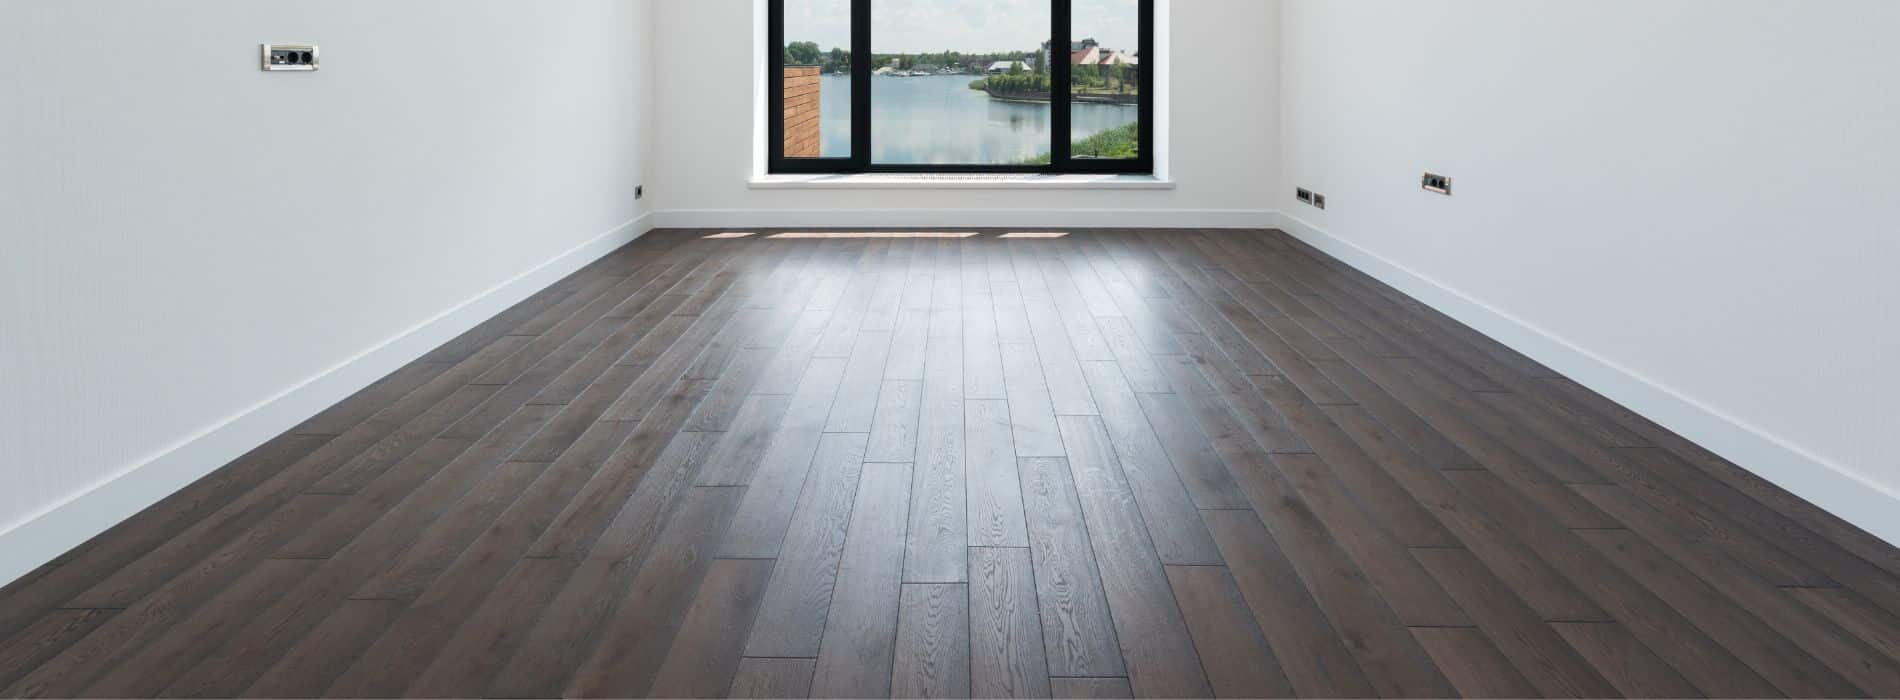 Exquisite 7-year-old hardwood floor in Greater London (West) skillfully restored by Mr Sander®. The use of Bona 2.5K Frost whitewashing and Traffic HD 20% sheen matte lacquer ensures a resilient and captivating finish. Experience enduring elegance with this stunning restoration.